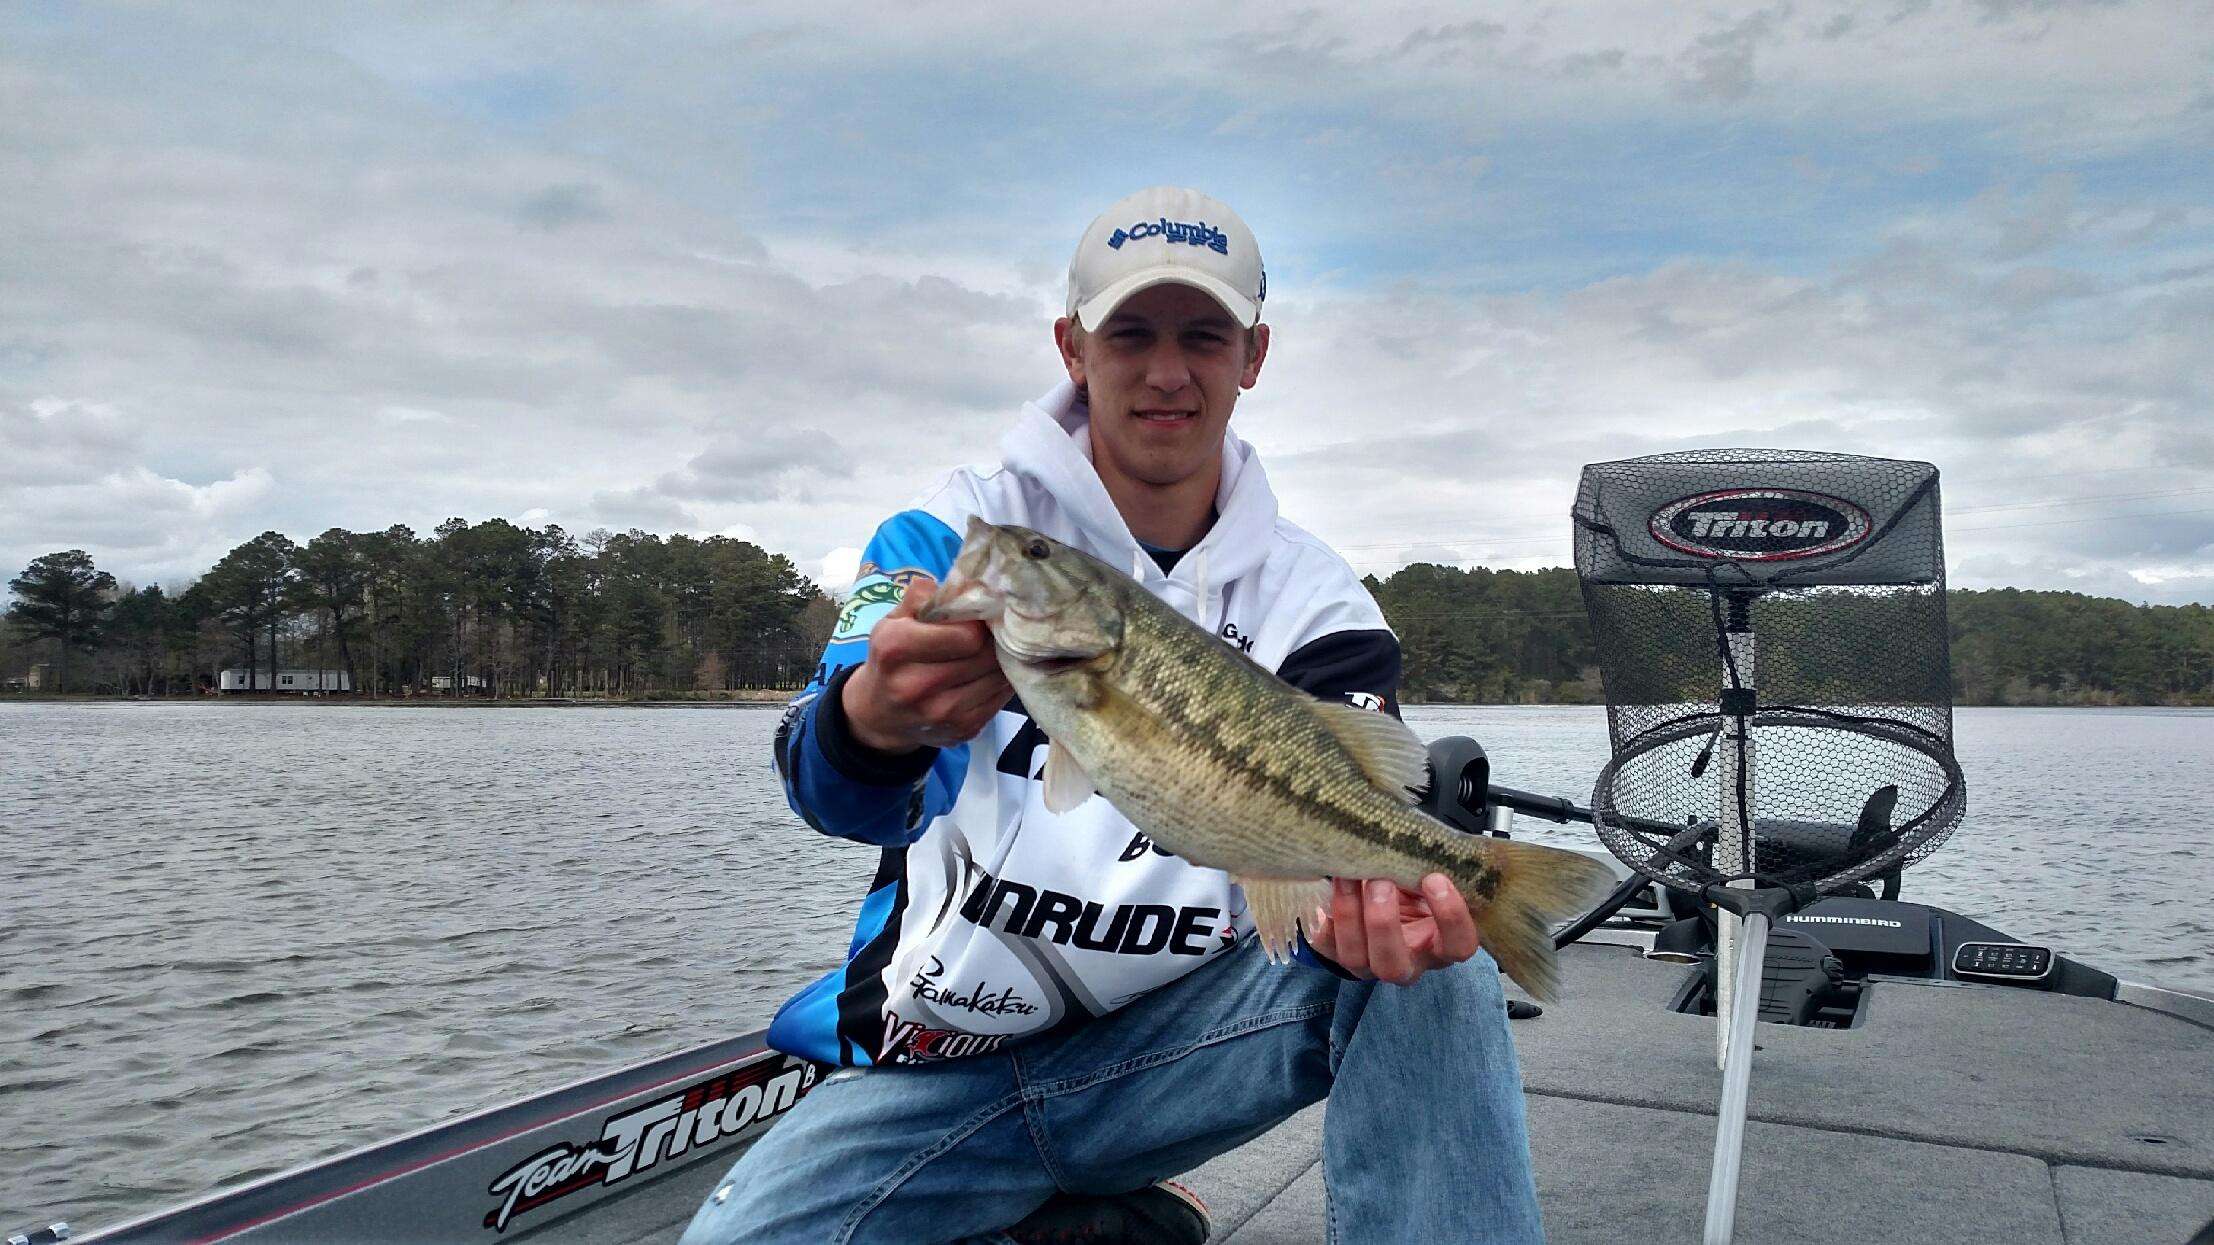 <b>Hunter Penney, Boaz, Ala.</b><br>
A senior at Susan Moore High School, Penney has earned five wins in tournaments on both high school and adult levels, including a 41 boat-field Airport Marine event, where he also took home big bass honors. PenneyÃ¢ÂÂs biggest career highlight was winning the 2014 Airport Marine Classic on Lay Lake against a field of 69 boats.